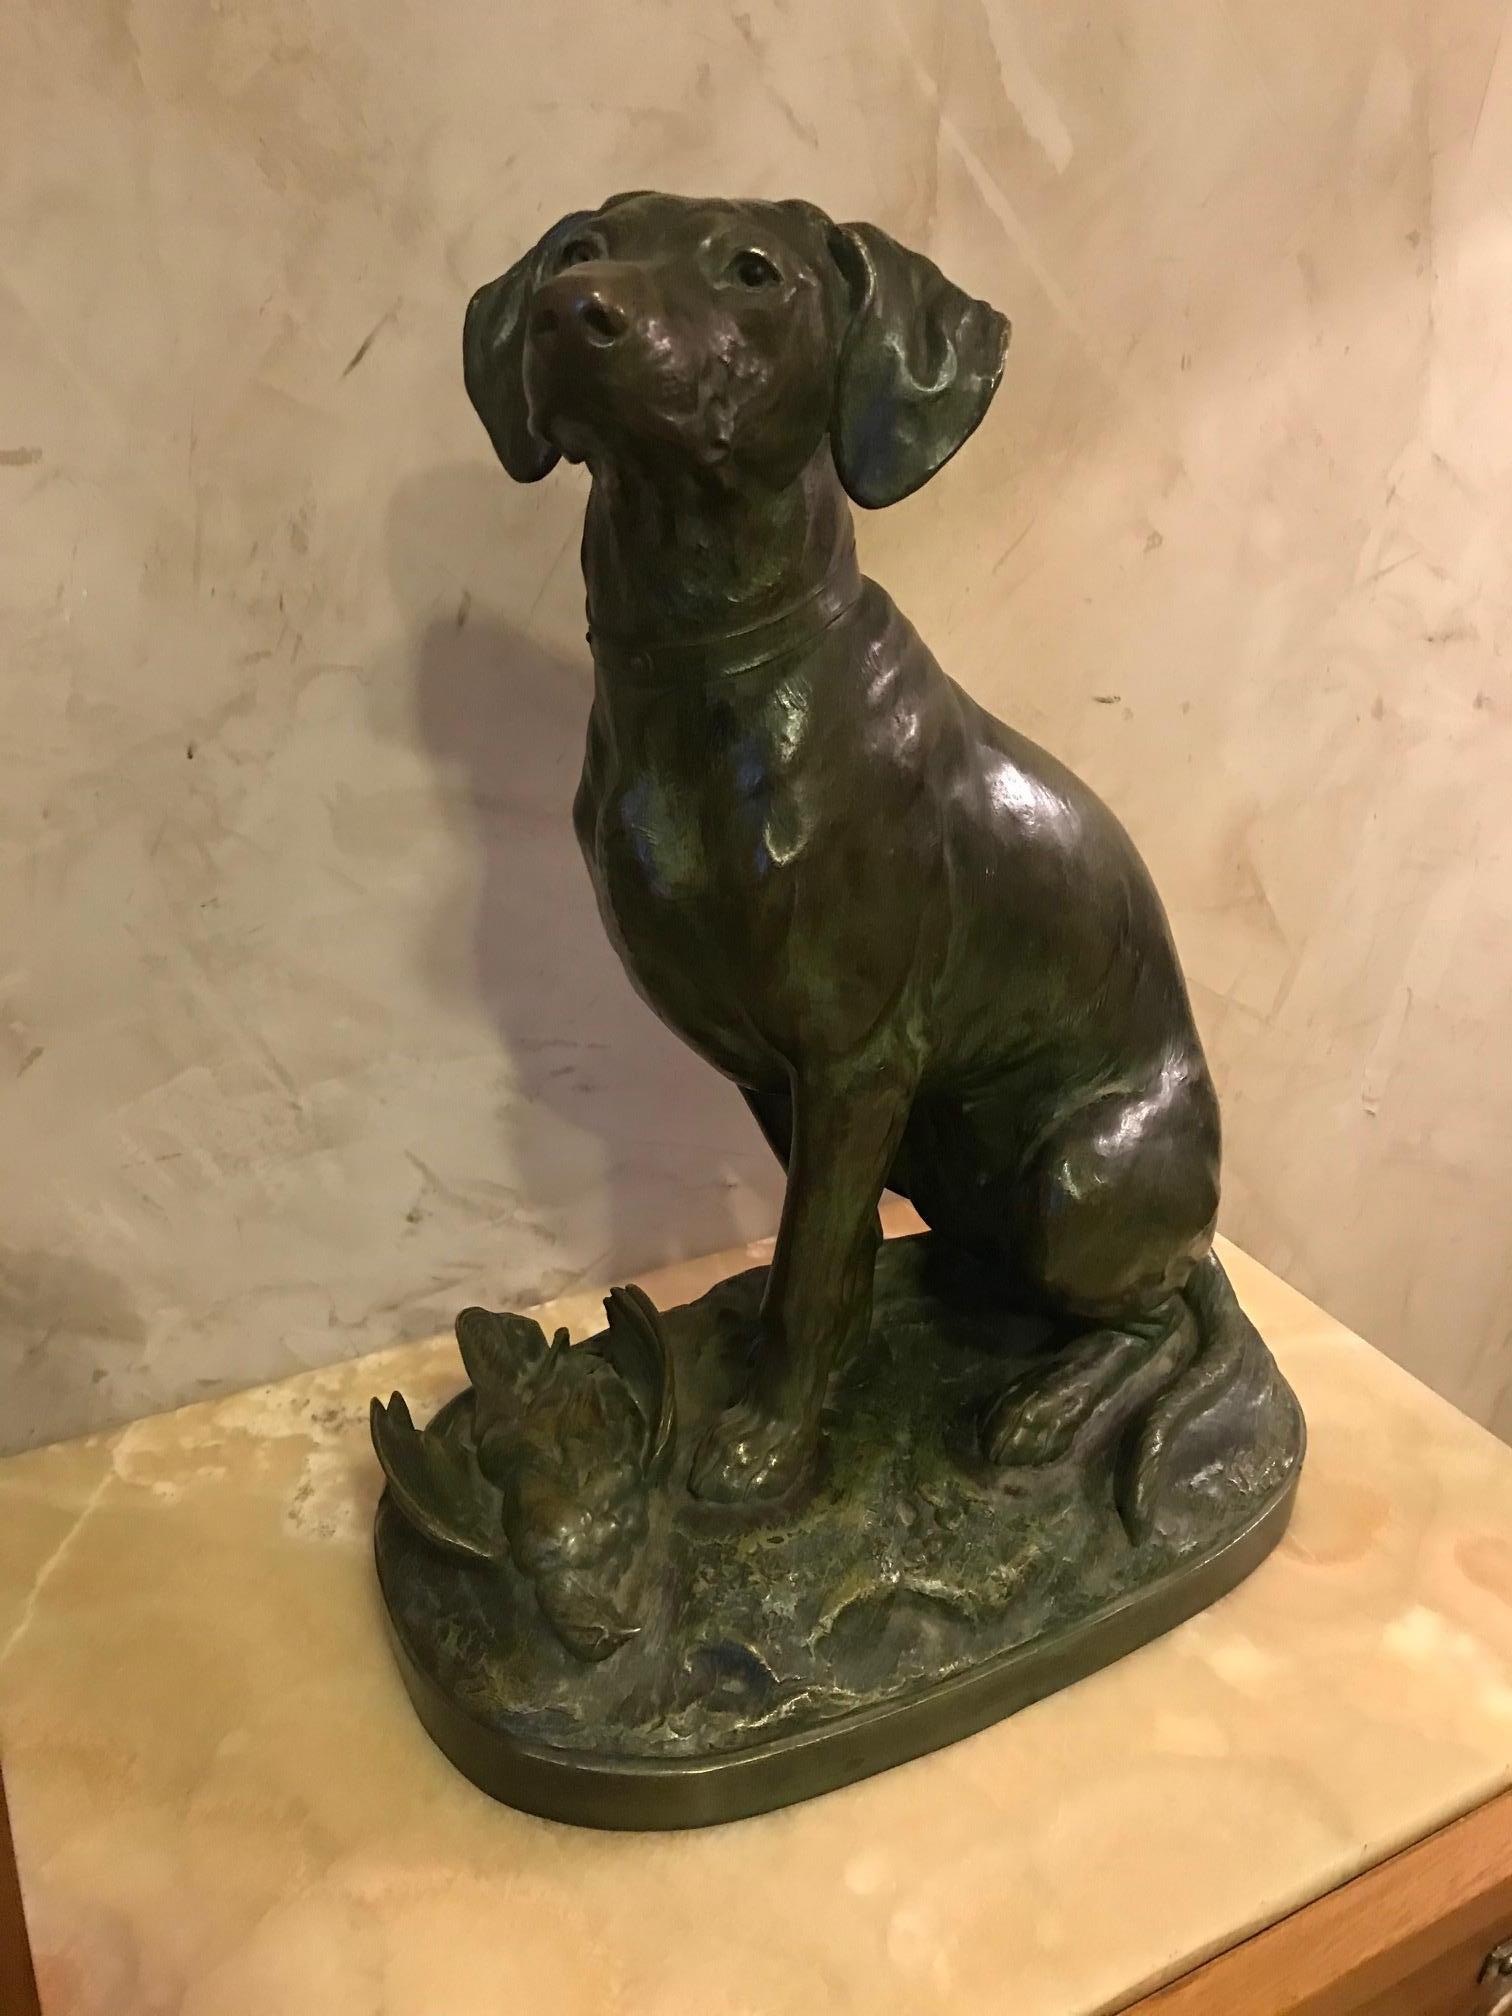 Exceptional bronze made by the French sculptor Jules Edmond Masson during the 1920s.
Jules Edmond Masson (1871-1932), son and pupil of Clovis Masson, sculptor and engraver of medals, he practices animal art and orientalist scenes. He made figures